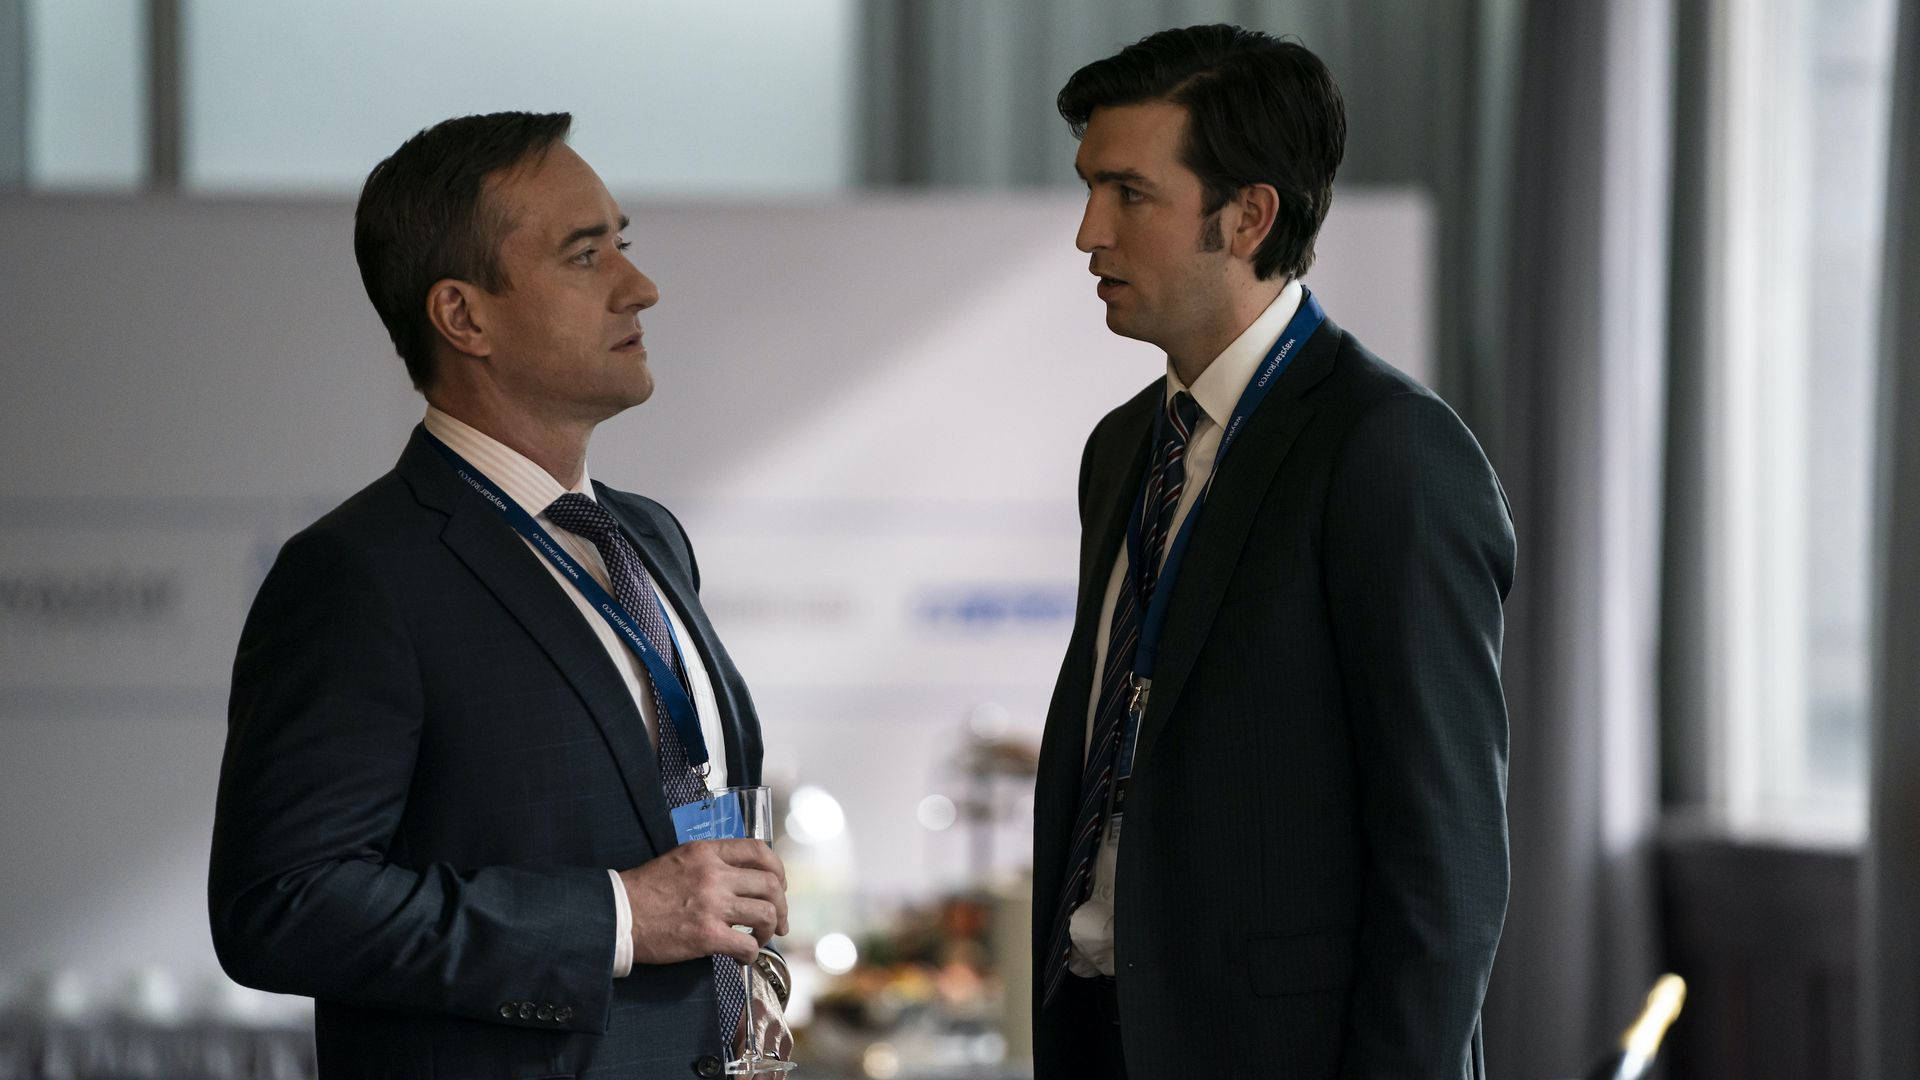 Intriguing Pic From Succession Featuring Characters Greg And Tom Background